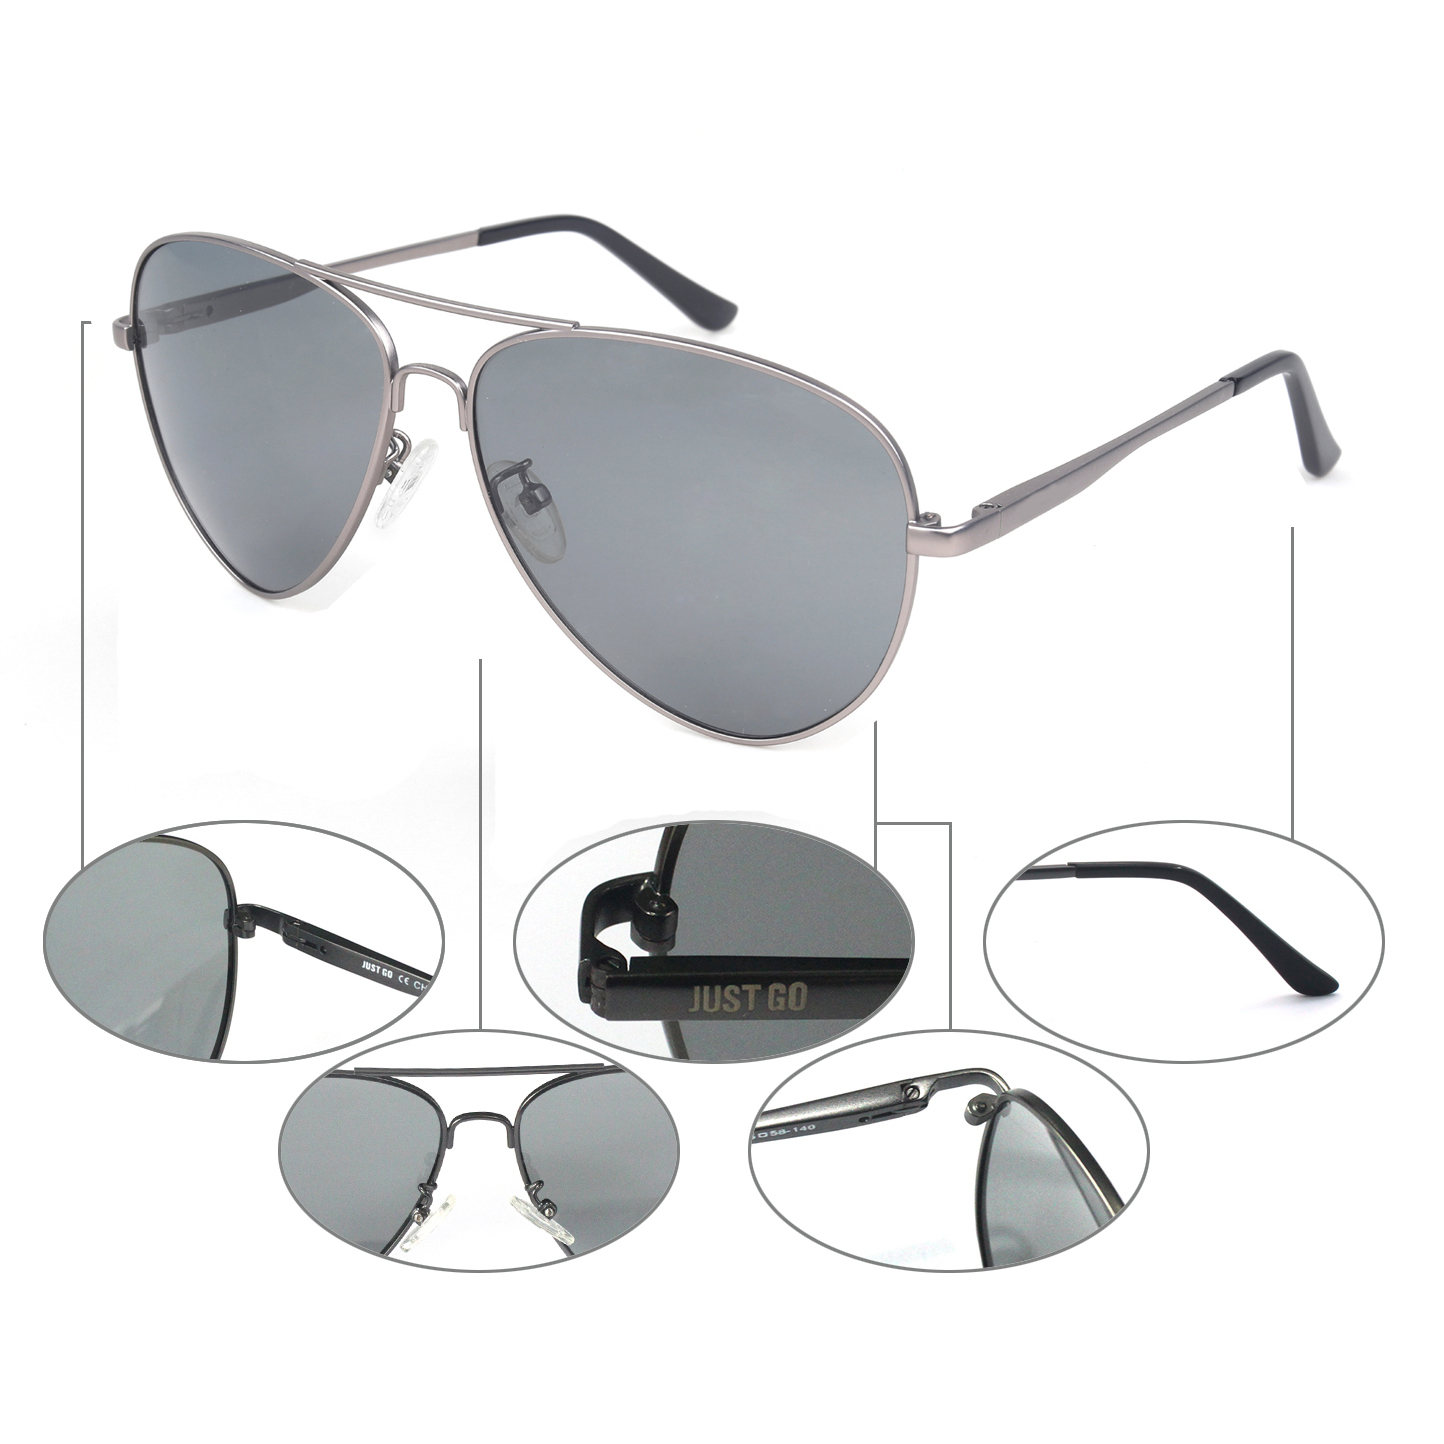 JUST GO Metal Frame Vintage Aviator Style Sunglasses with Case, Polarized Lenses, 100% UV Protection, Matte Gunmetal, Grey - image 4 of 7